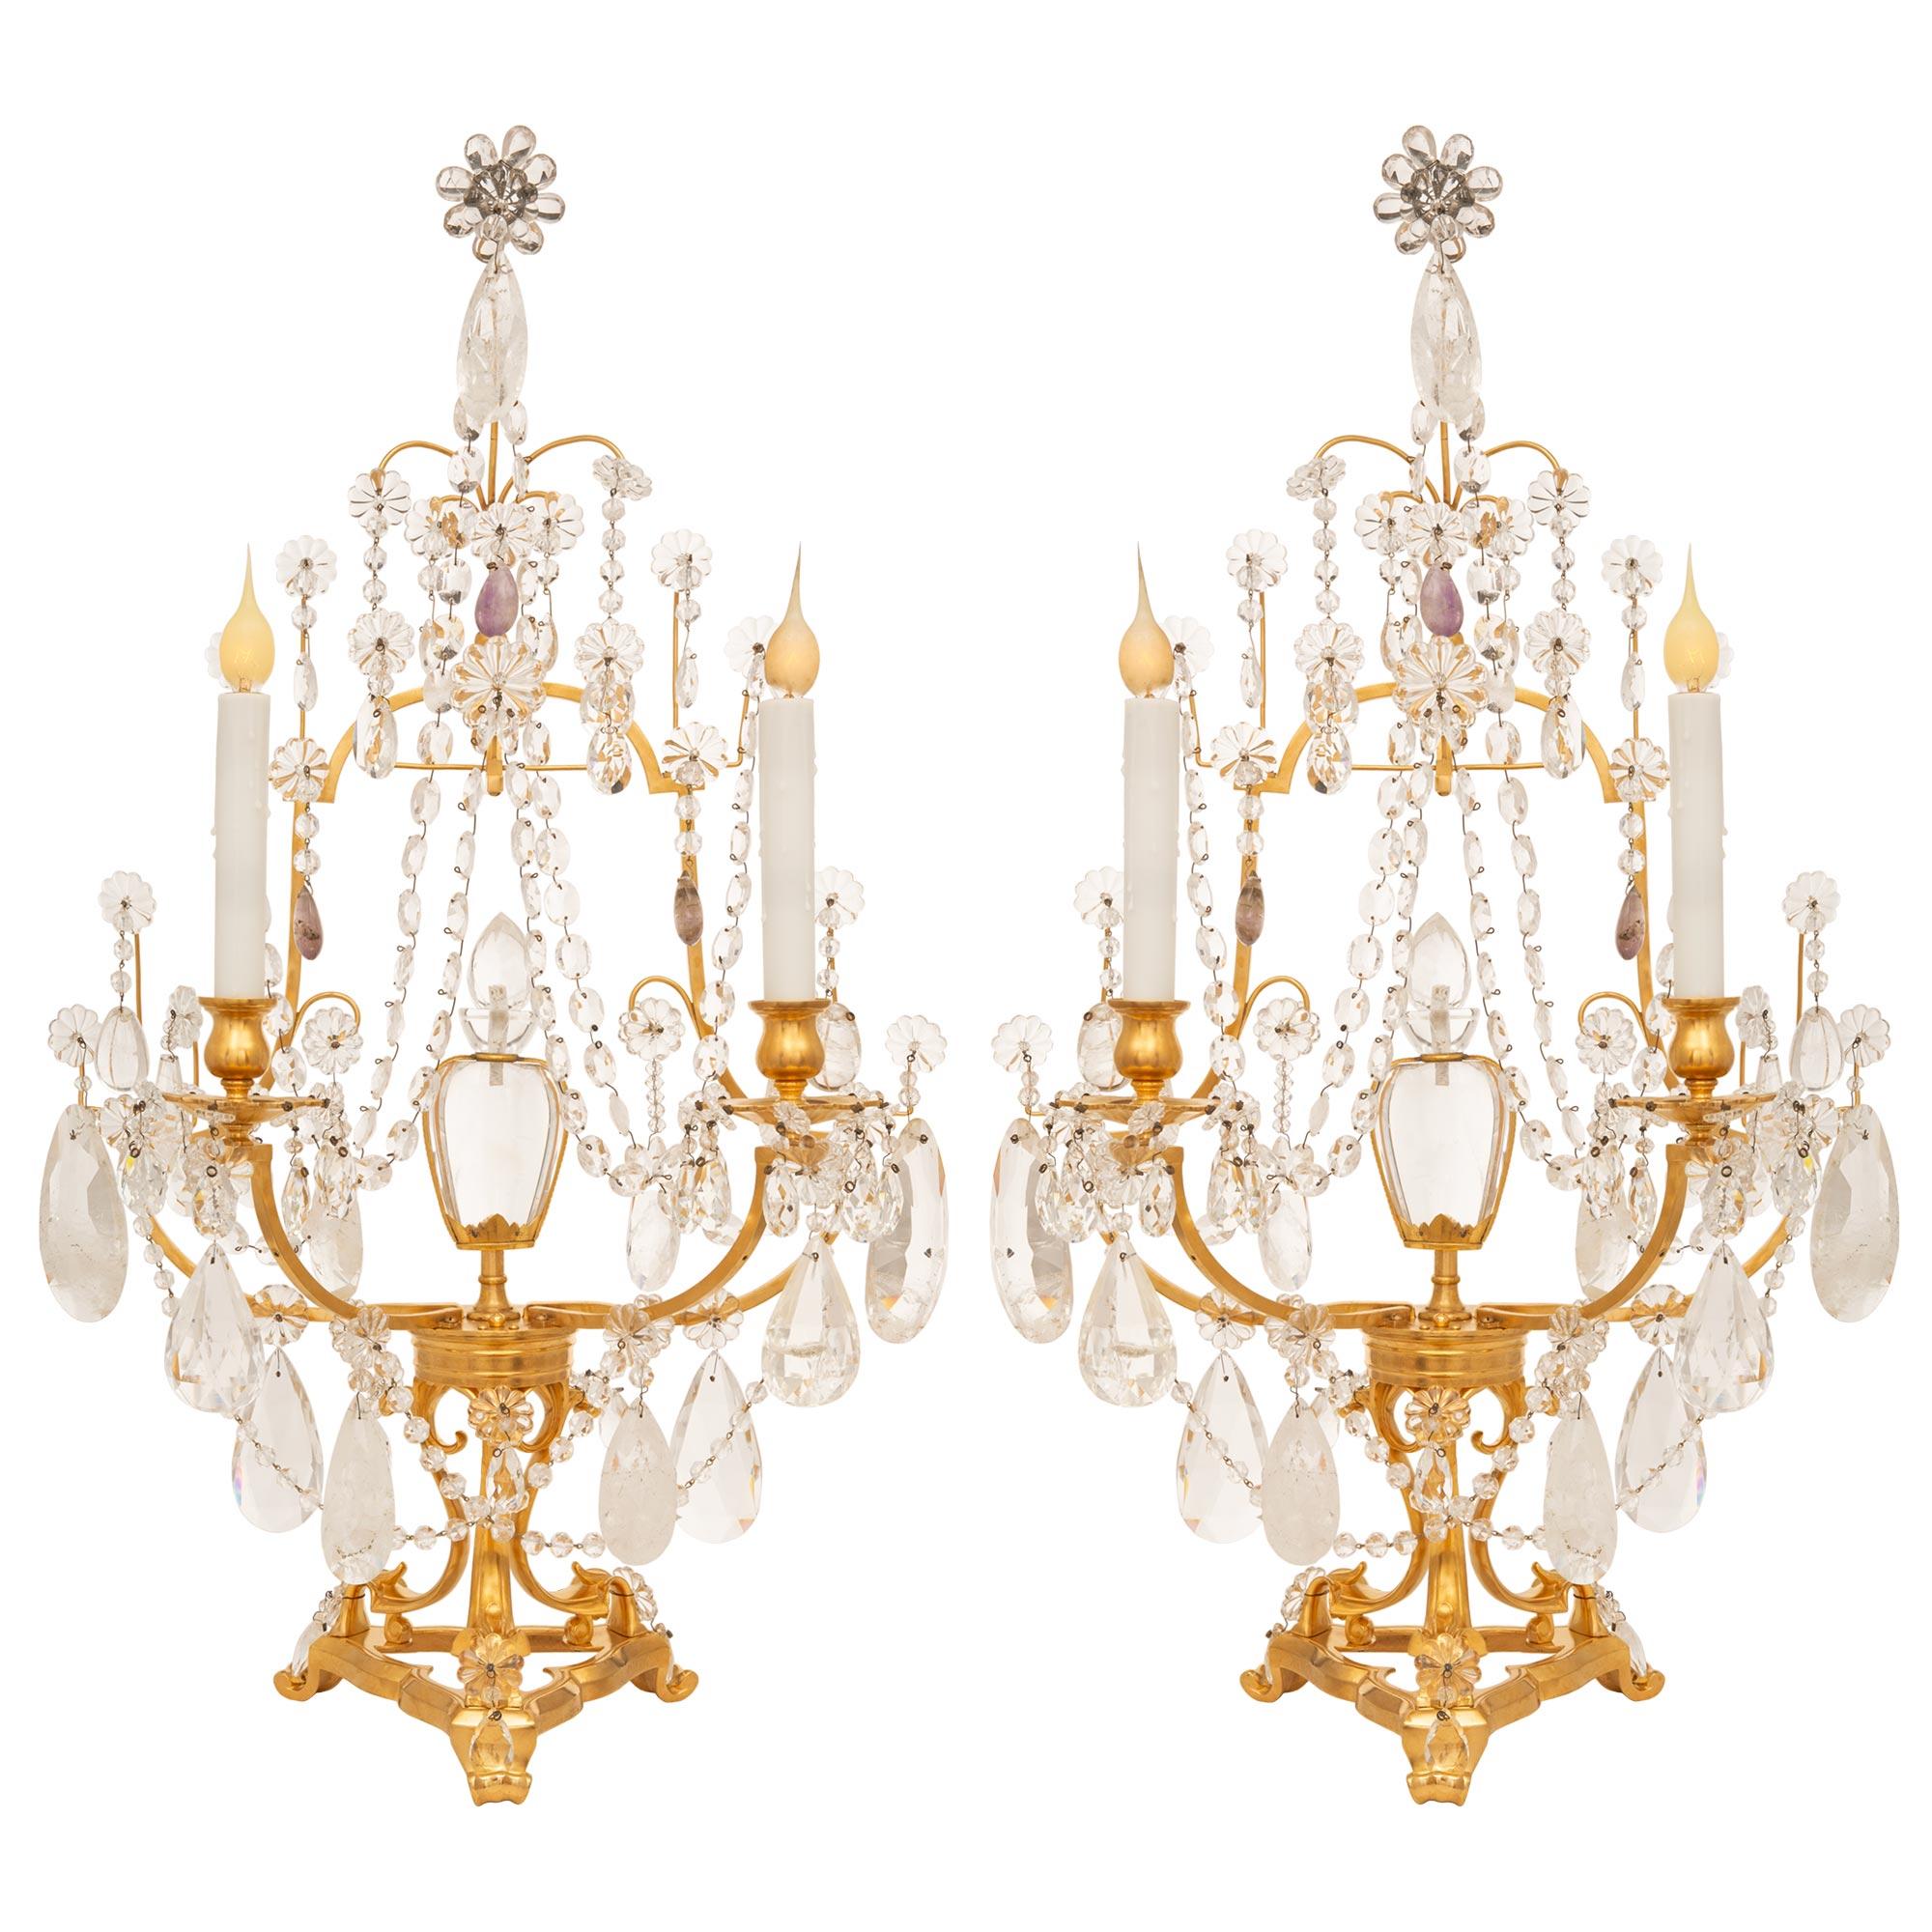 Pair Of French 19th Century Louis XVI St. Rock Crystal & Ormolu Girondoles Lamp For Sale 6